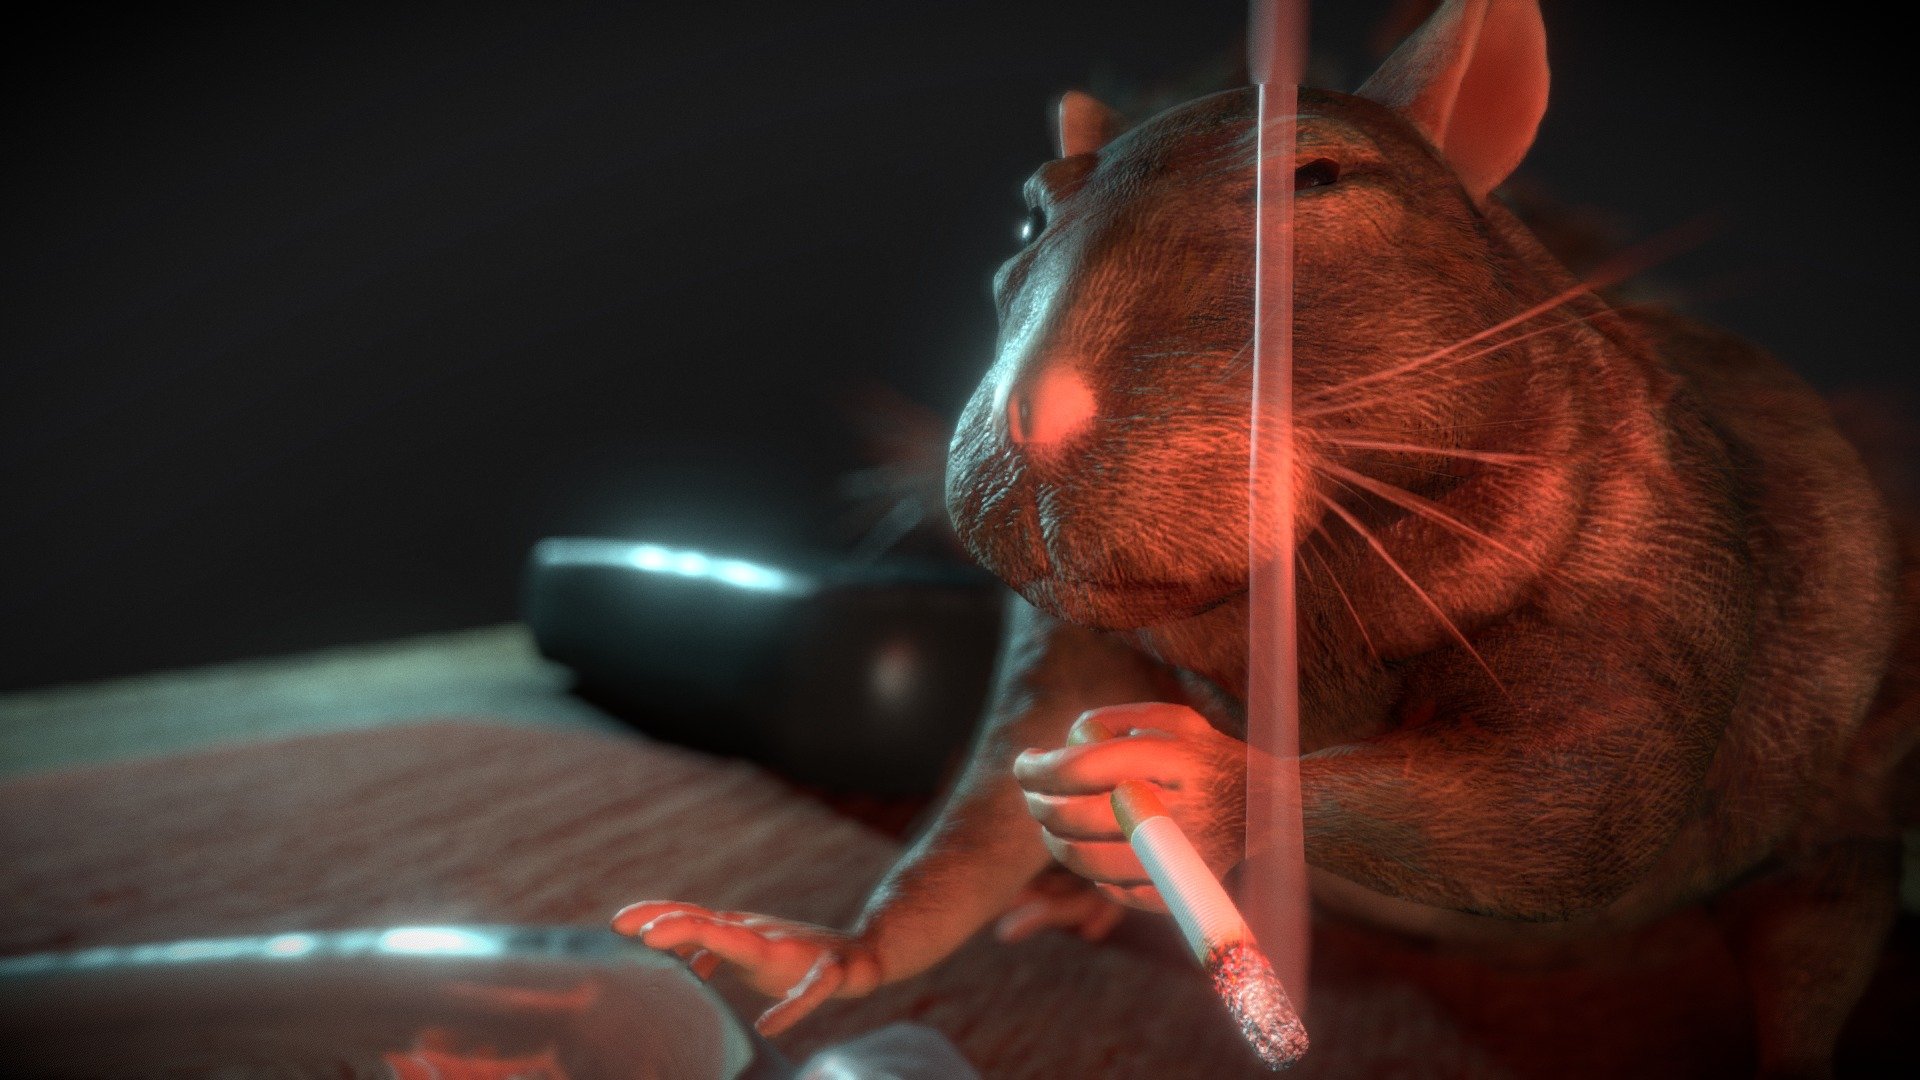 A rotund rat enjoying a cigarette.

Workflow:
Maya (Lowpoly) -&gt; Zbrush Sculpt (HiPoly) -&gt; Maya (Cloth + Smoke simulation) -&gt; Substance (PBR Pass) -&gt; Sketchfab

So some things I did with this one were use Maya fluid simulations and then made duplicates of the geometry on each frame of the simulation. To animate this, &lsquo;Visbility' was animated on stepped mode to &lsquo;on' and &lsquo;off'. The cloth was shaped using nCloth and the table as a collider. This was baked into static mesh. All of the models have mesh maps and hi polys that were baked in Substance (curvature, thickness, etc.). The hair was made in photoshop with transparency and then placed card by card on the mesh.

Enjoy!

CONTACT for other model formats if neccesary 3d model